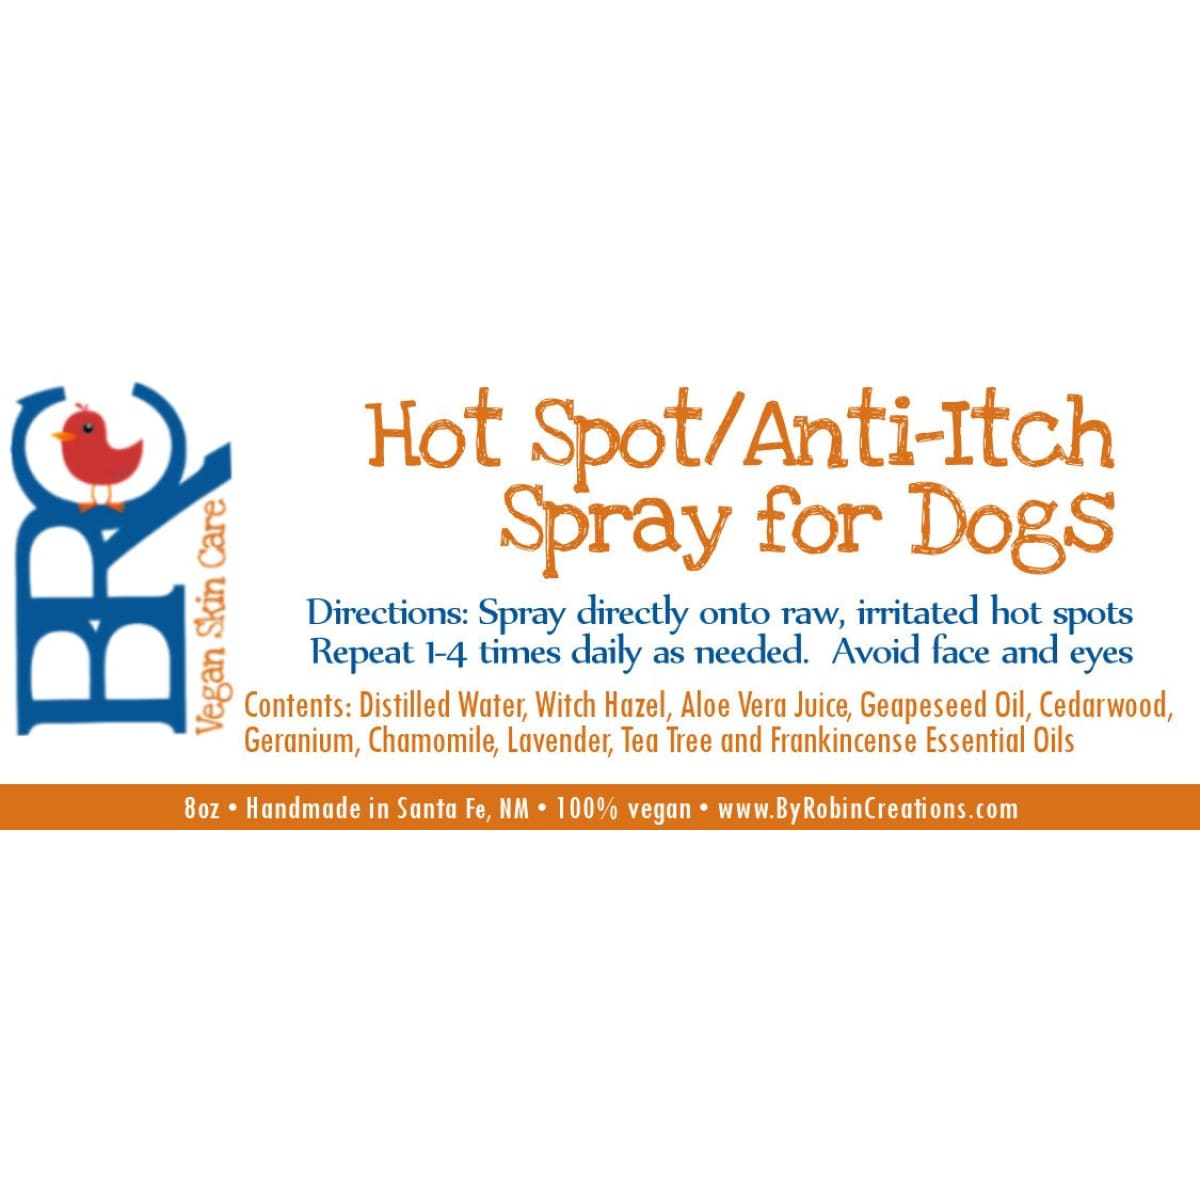 Anti-Itch and Hotspot Spray for Dogs | By Robin Creations 